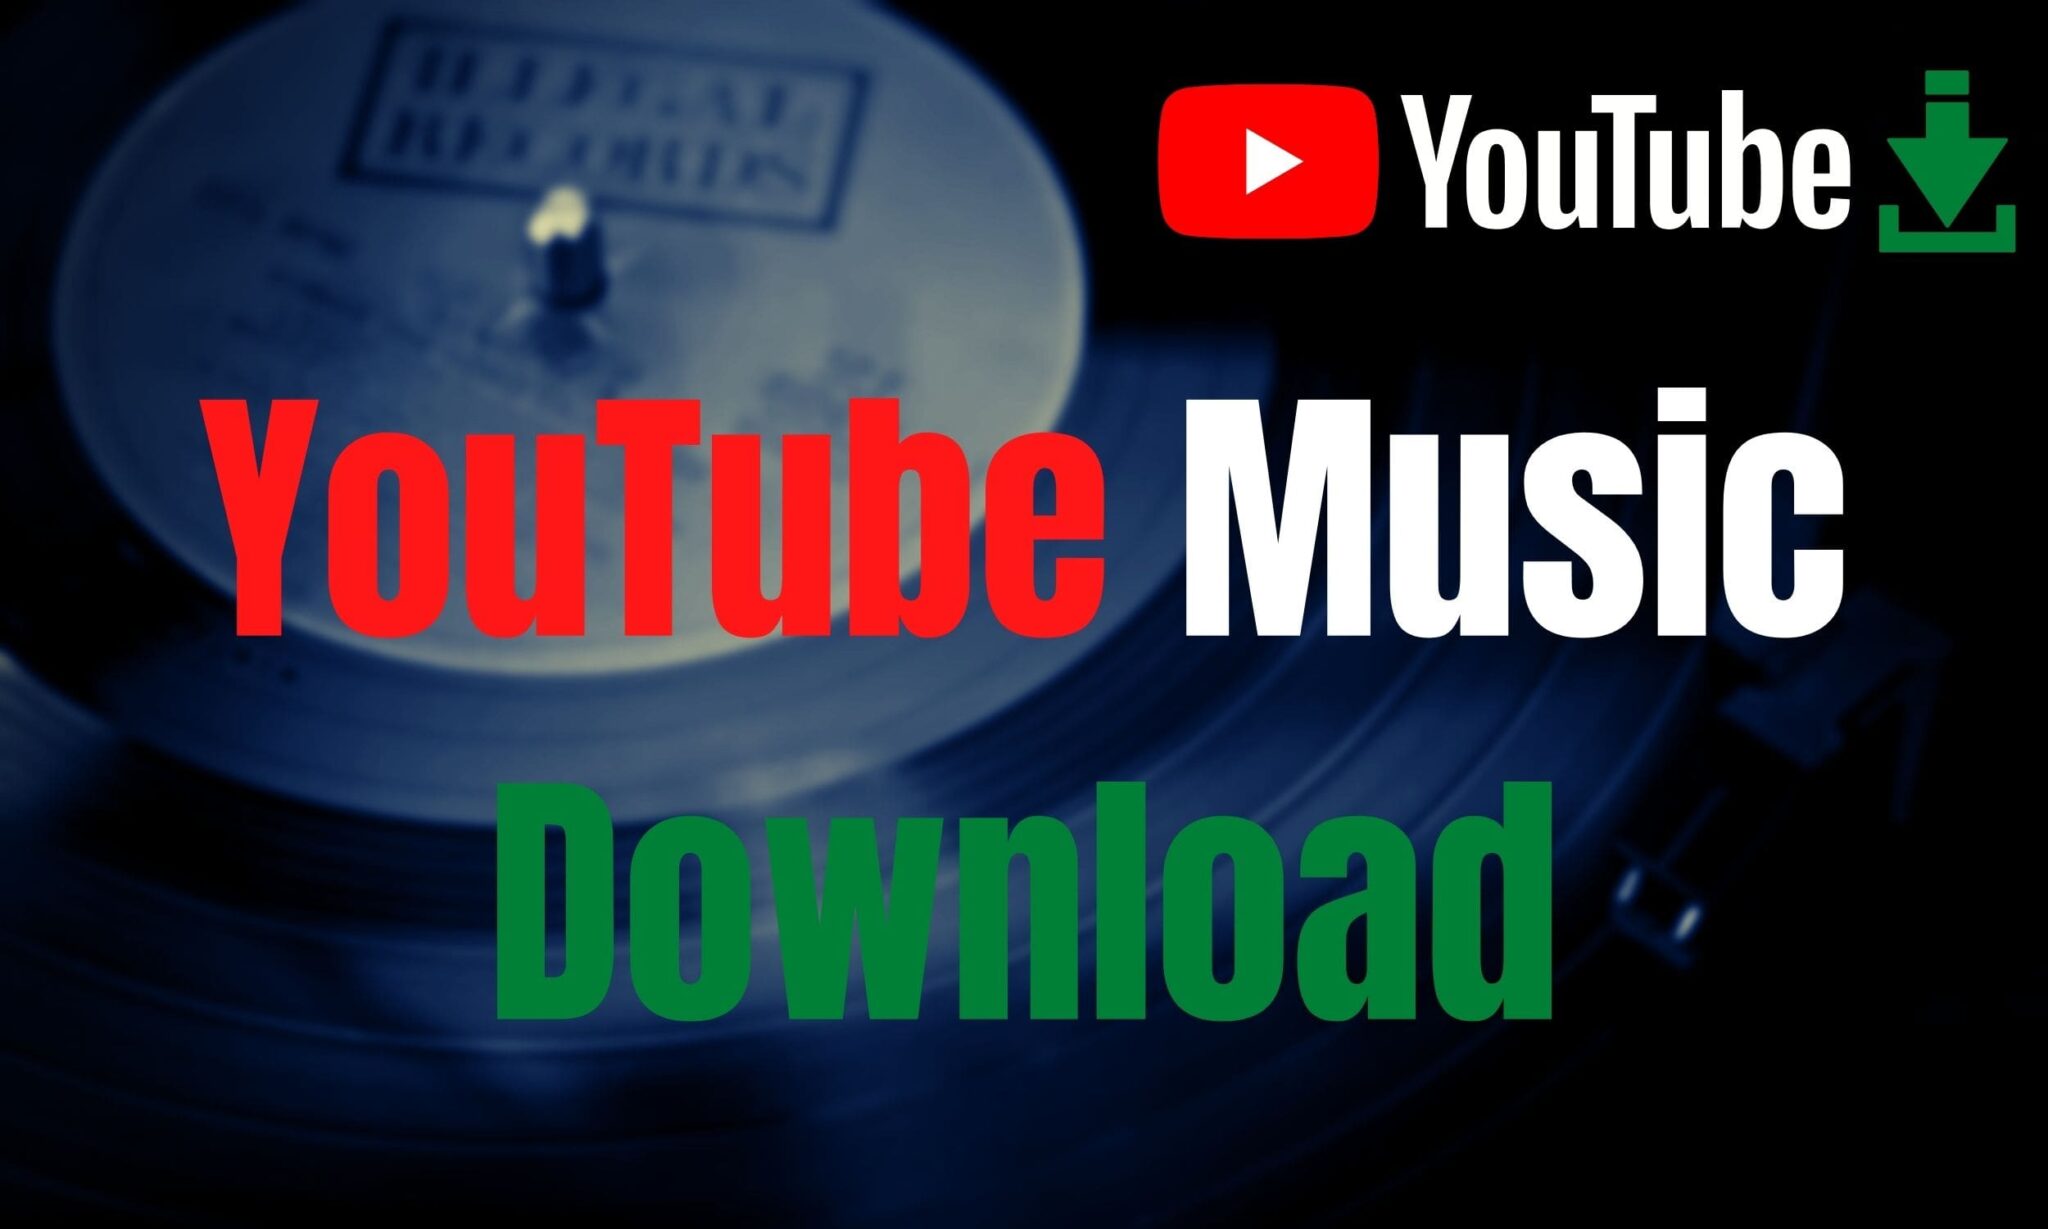 mp3 youtube music download free